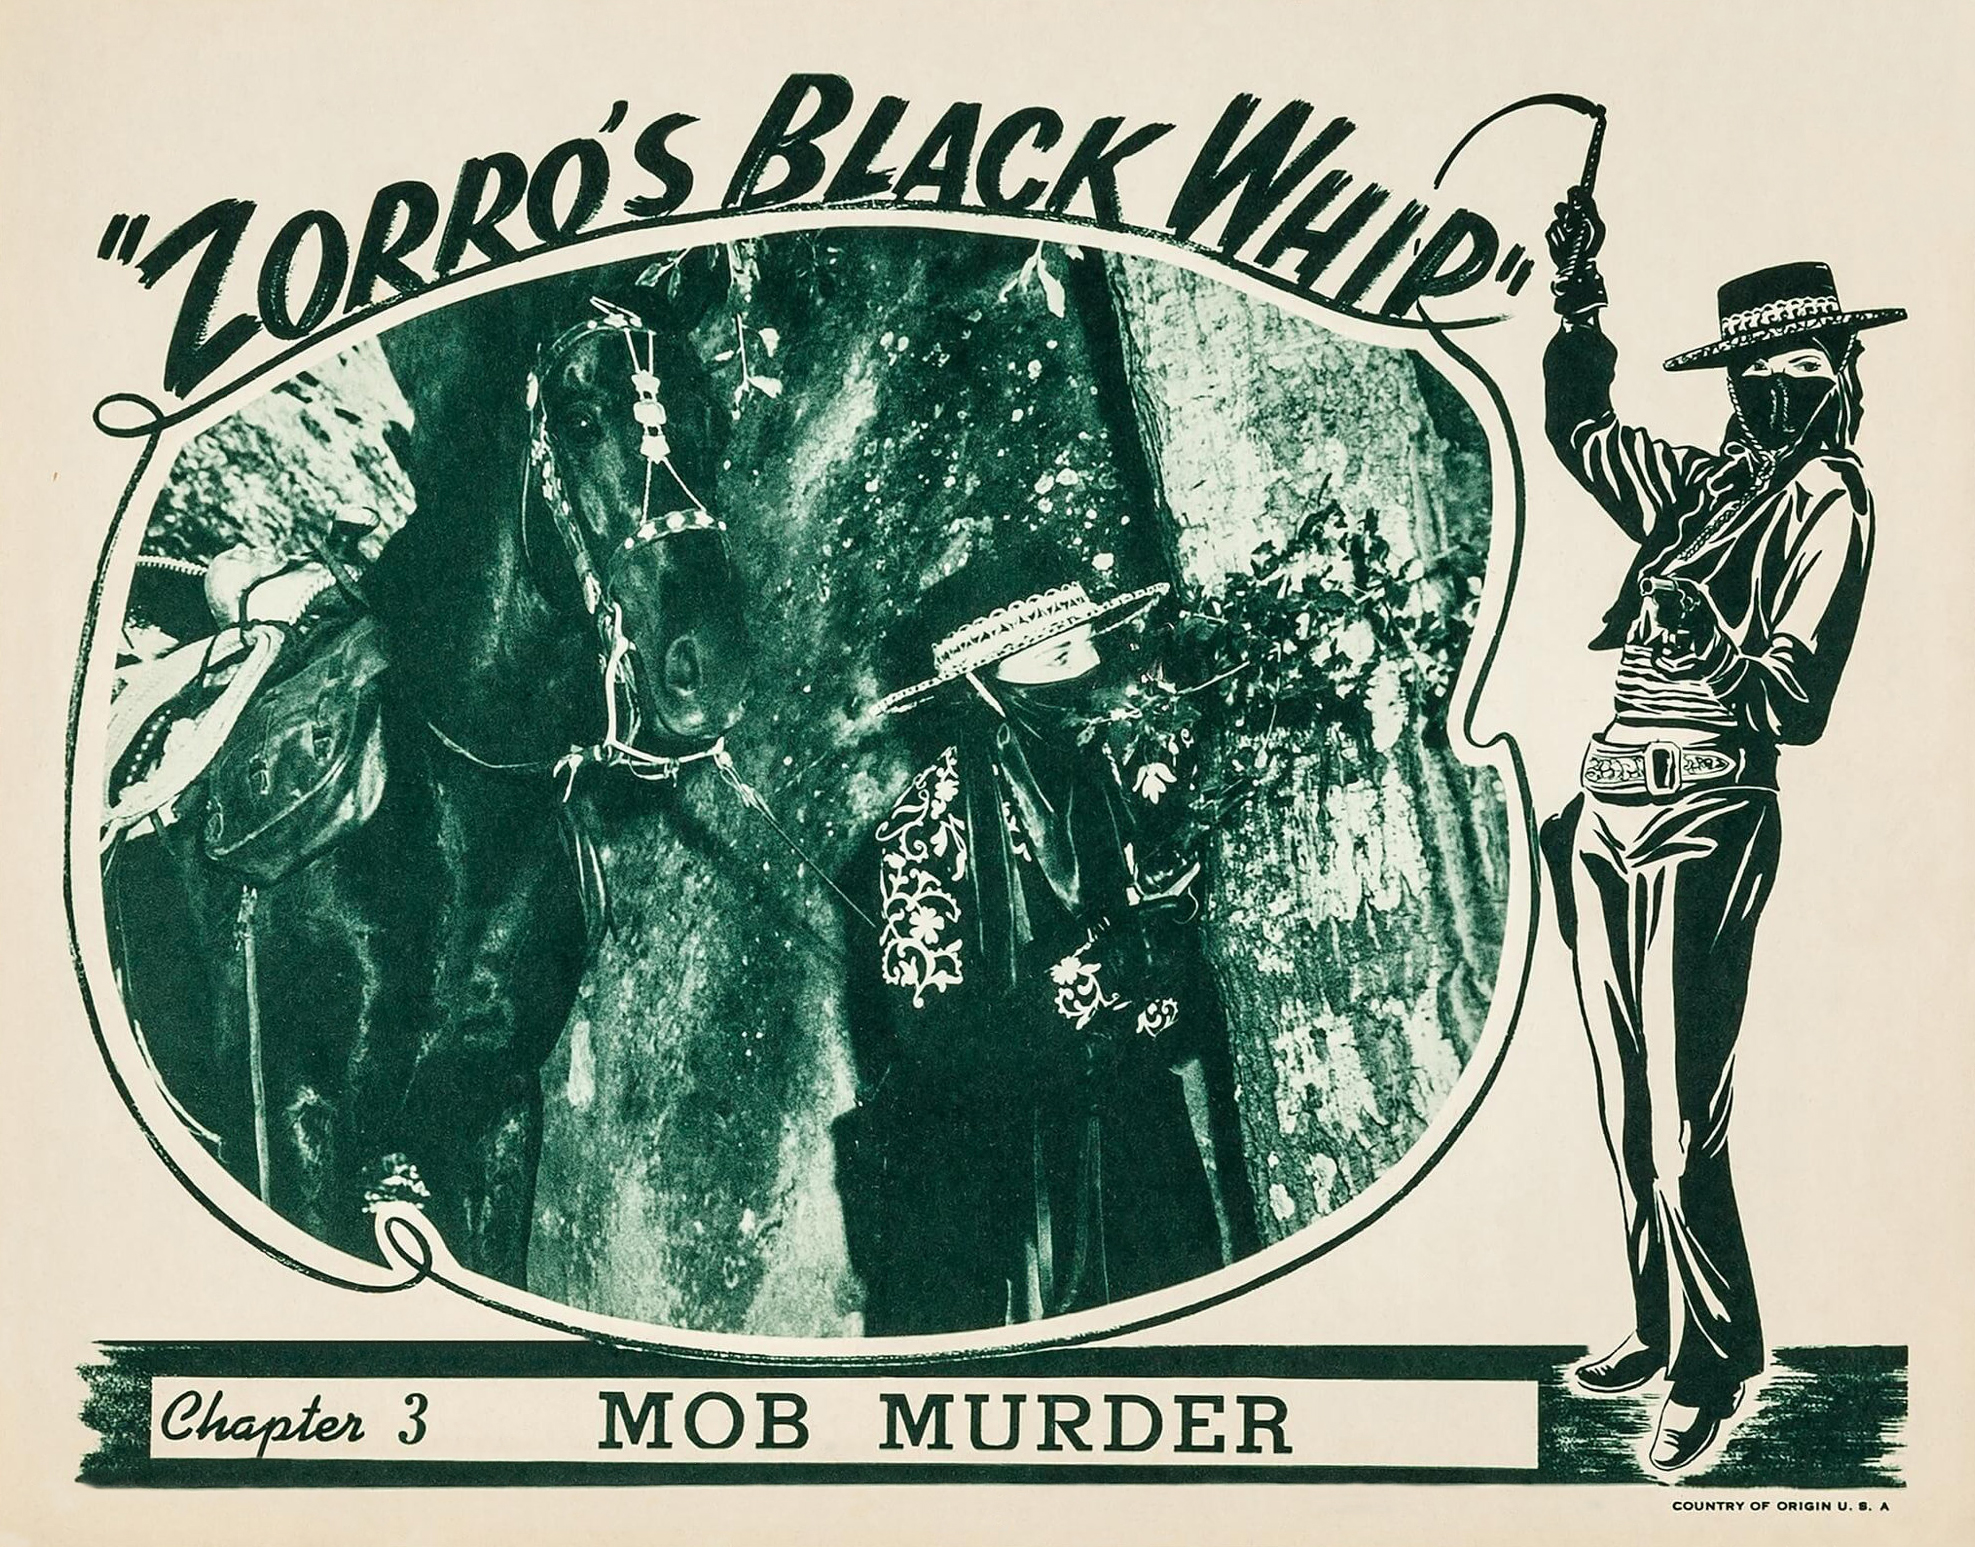 Zorro's Black Whip was made after the popular 20th Century-Fox remake ...